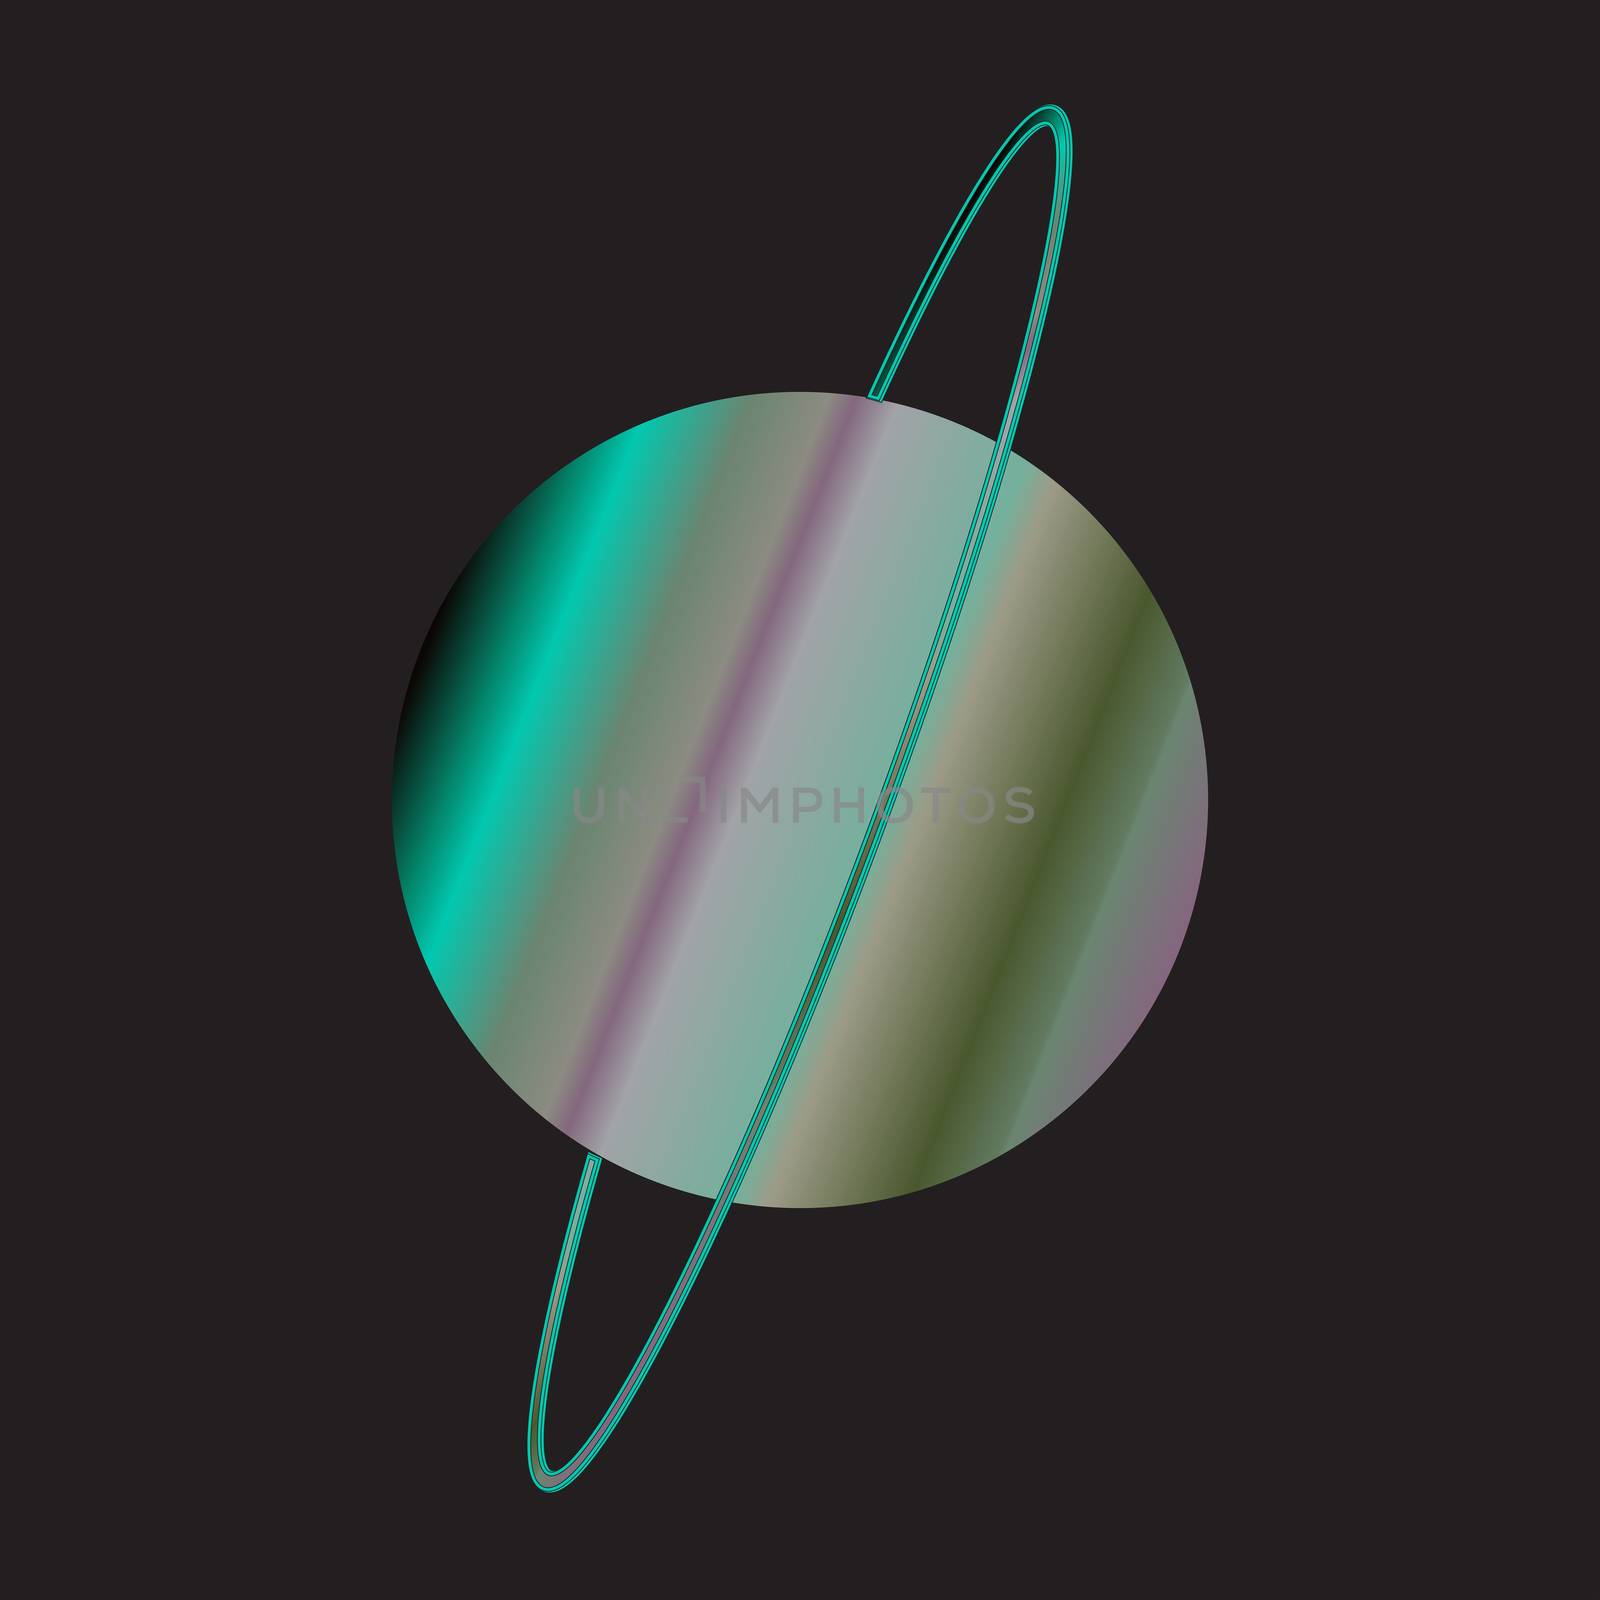 A representation of the planet Uranus with rings over a black background